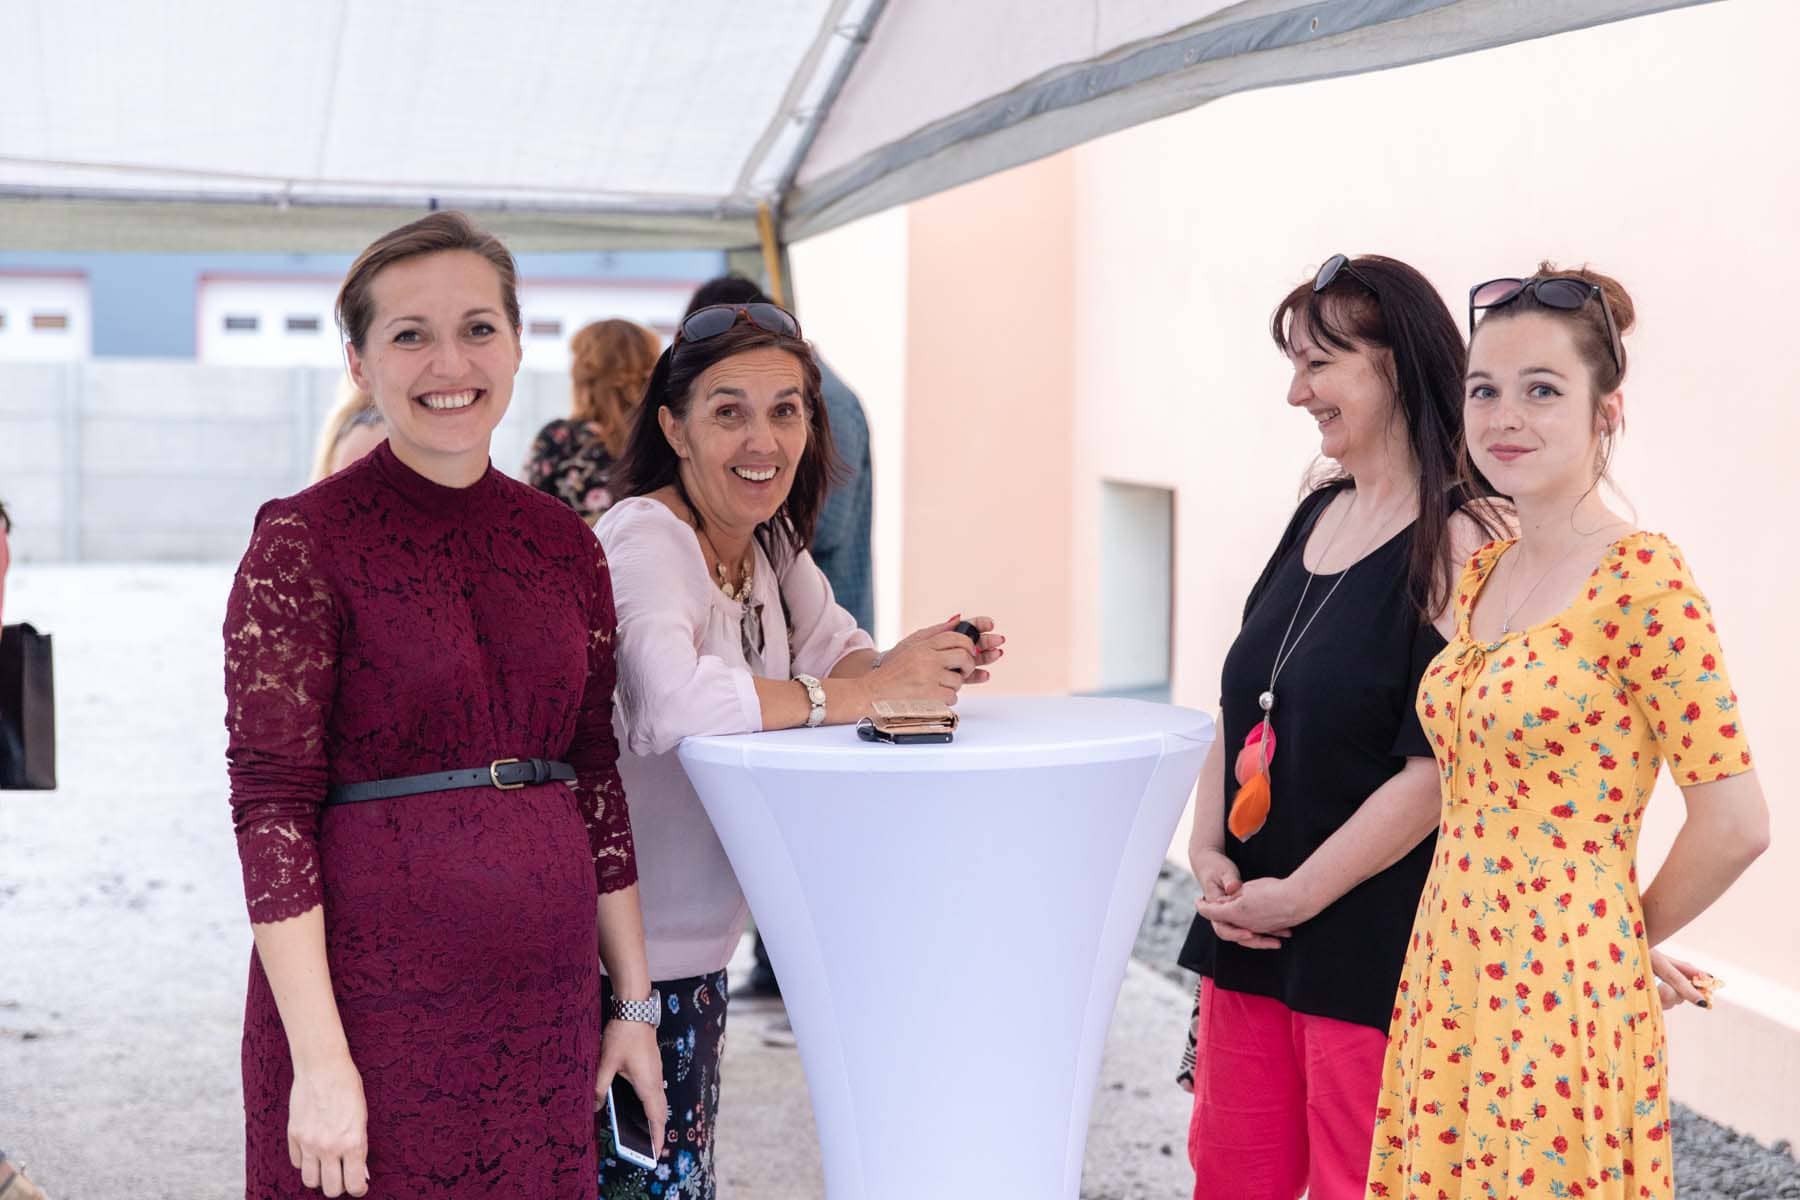 Ms. Anna Humbert (left) with guests of the event